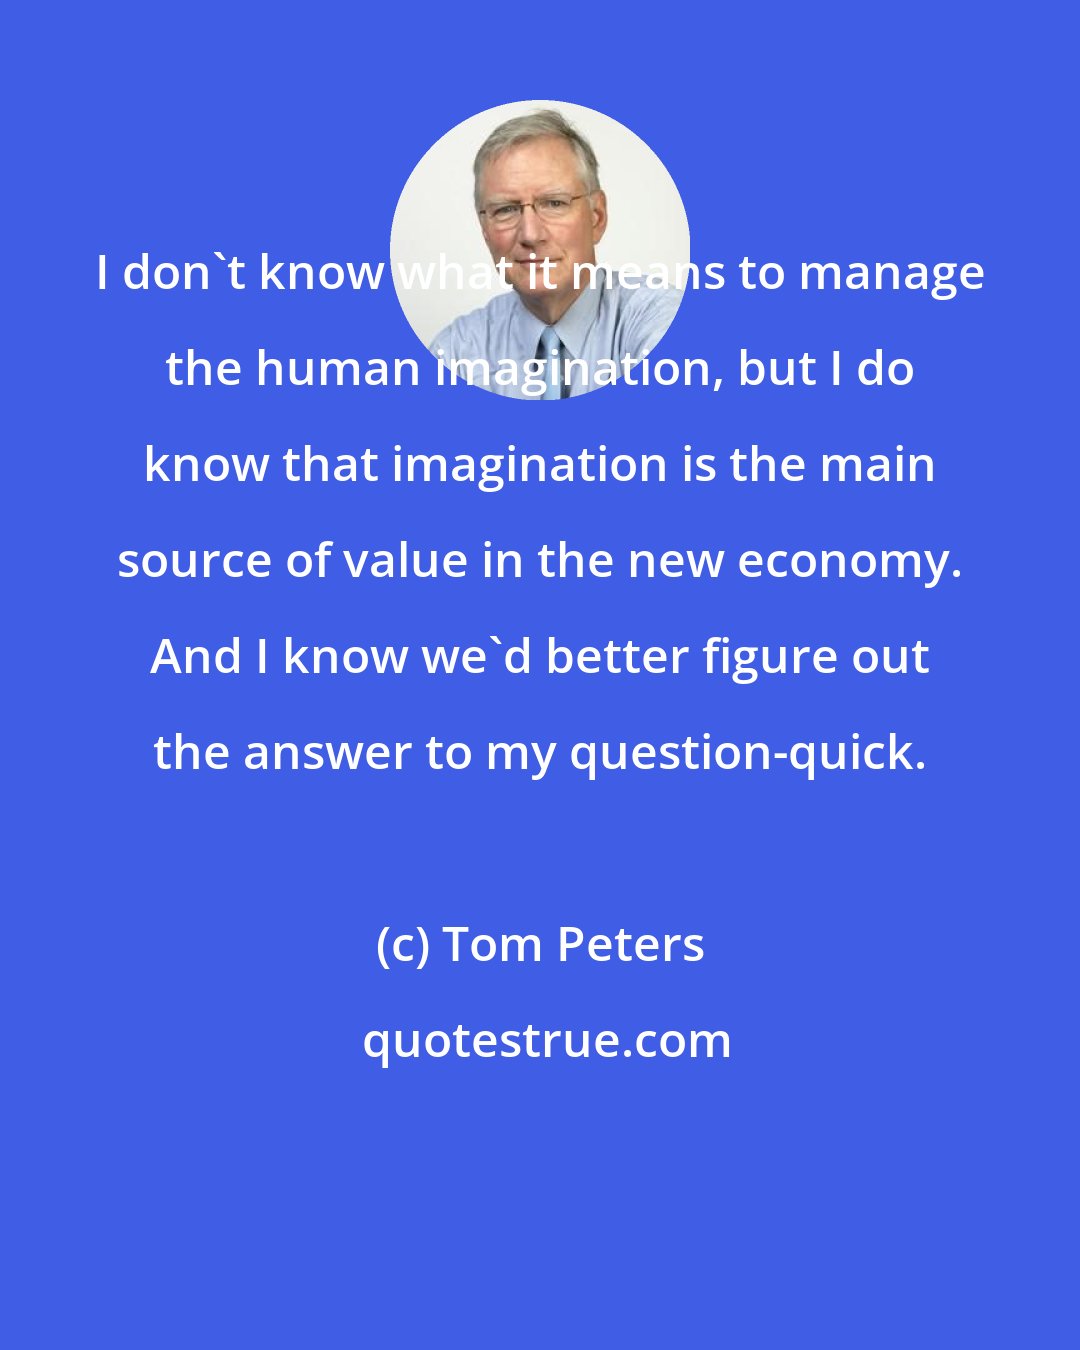 Tom Peters: I don't know what it means to manage the human imagination, but I do know that imagination is the main source of value in the new economy. And I know we'd better figure out the answer to my question-quick.